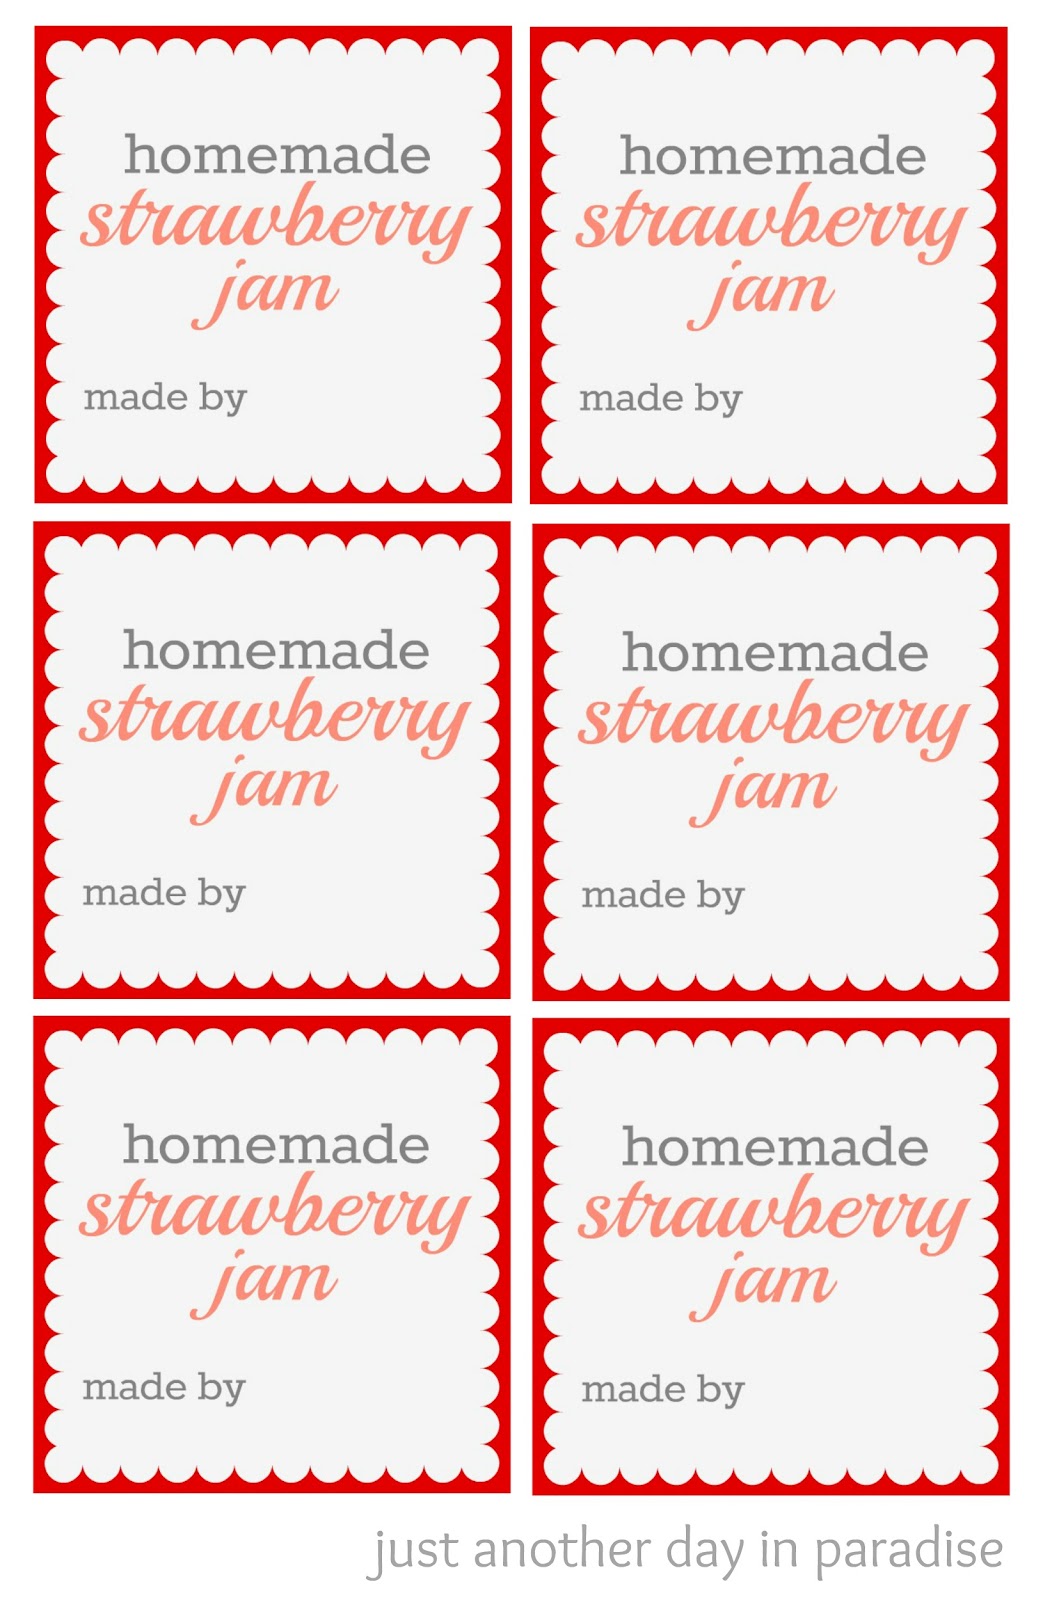 larissa another day homemade strawberry jam labels